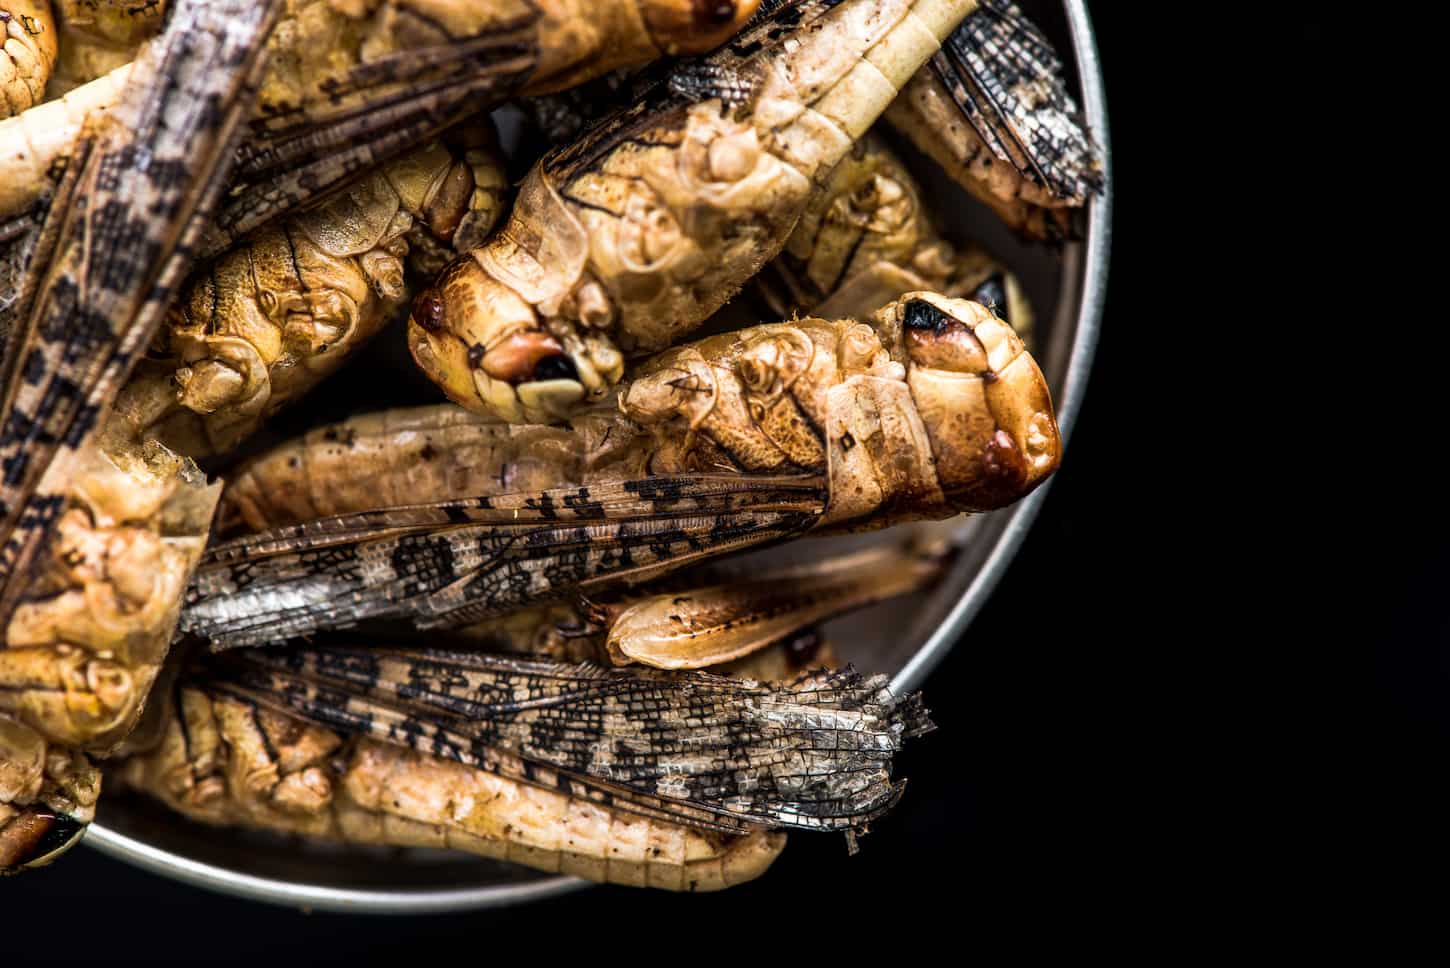 An image of edible fried worms in a pot on dark copy space.